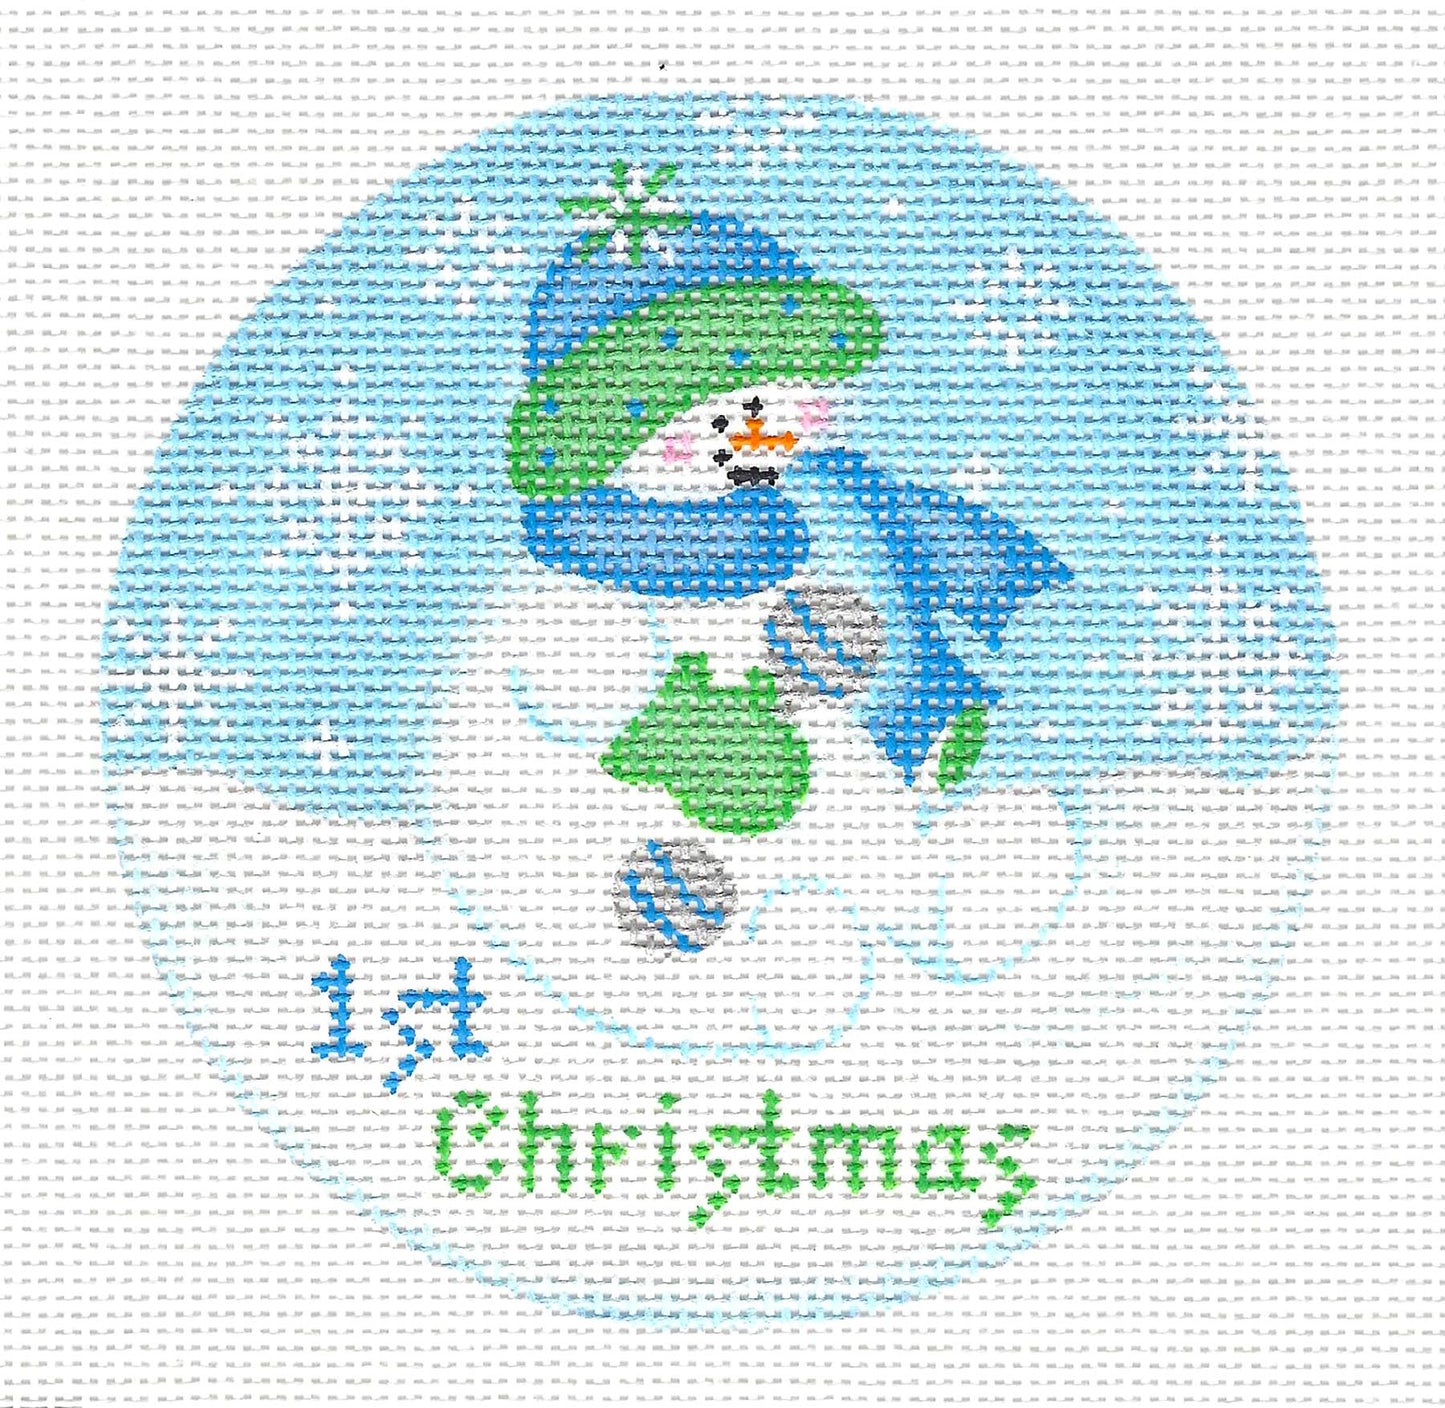 Baby Round ~ Baby Snowboy's 1st Christmas 18 Mesh 4" handpainted Needlepoint Canvas by Pepperberry